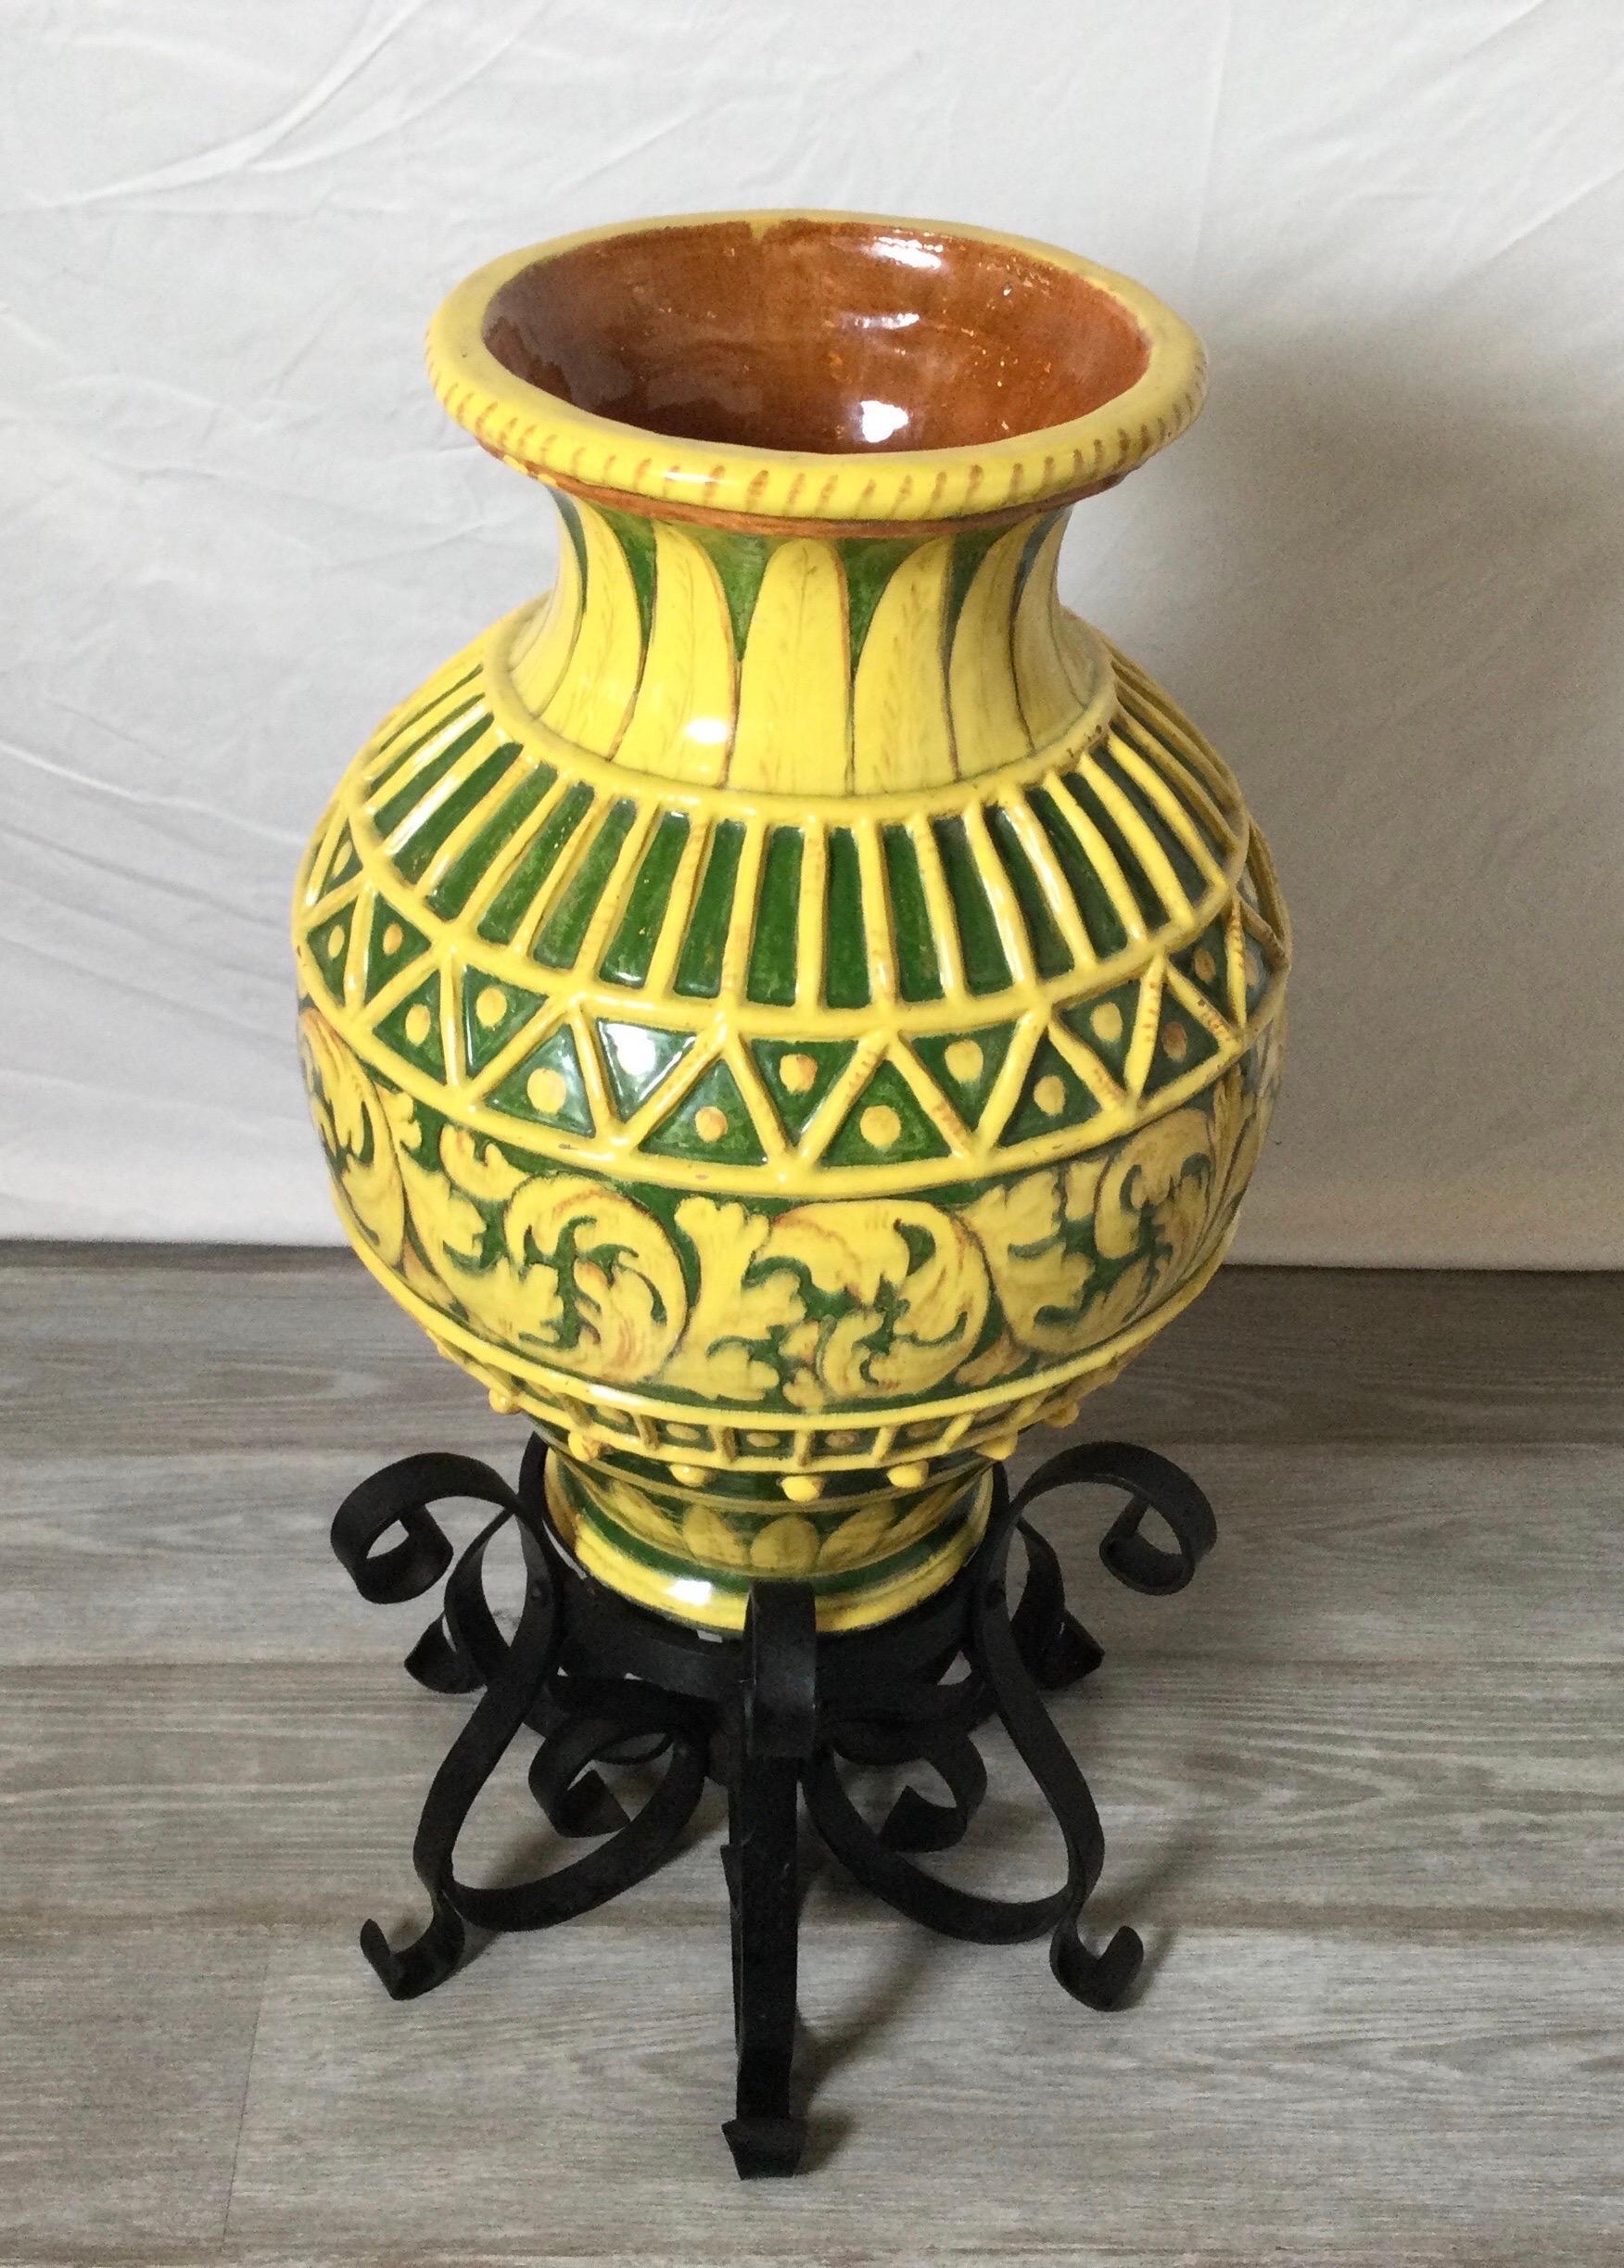 A vibrant yellow and green Italian earthen ware vessel with hand forged wrought iron stand. The glaze is hand decorated with a scrolled acanthus leaf design with a lattice work pattern at the top.